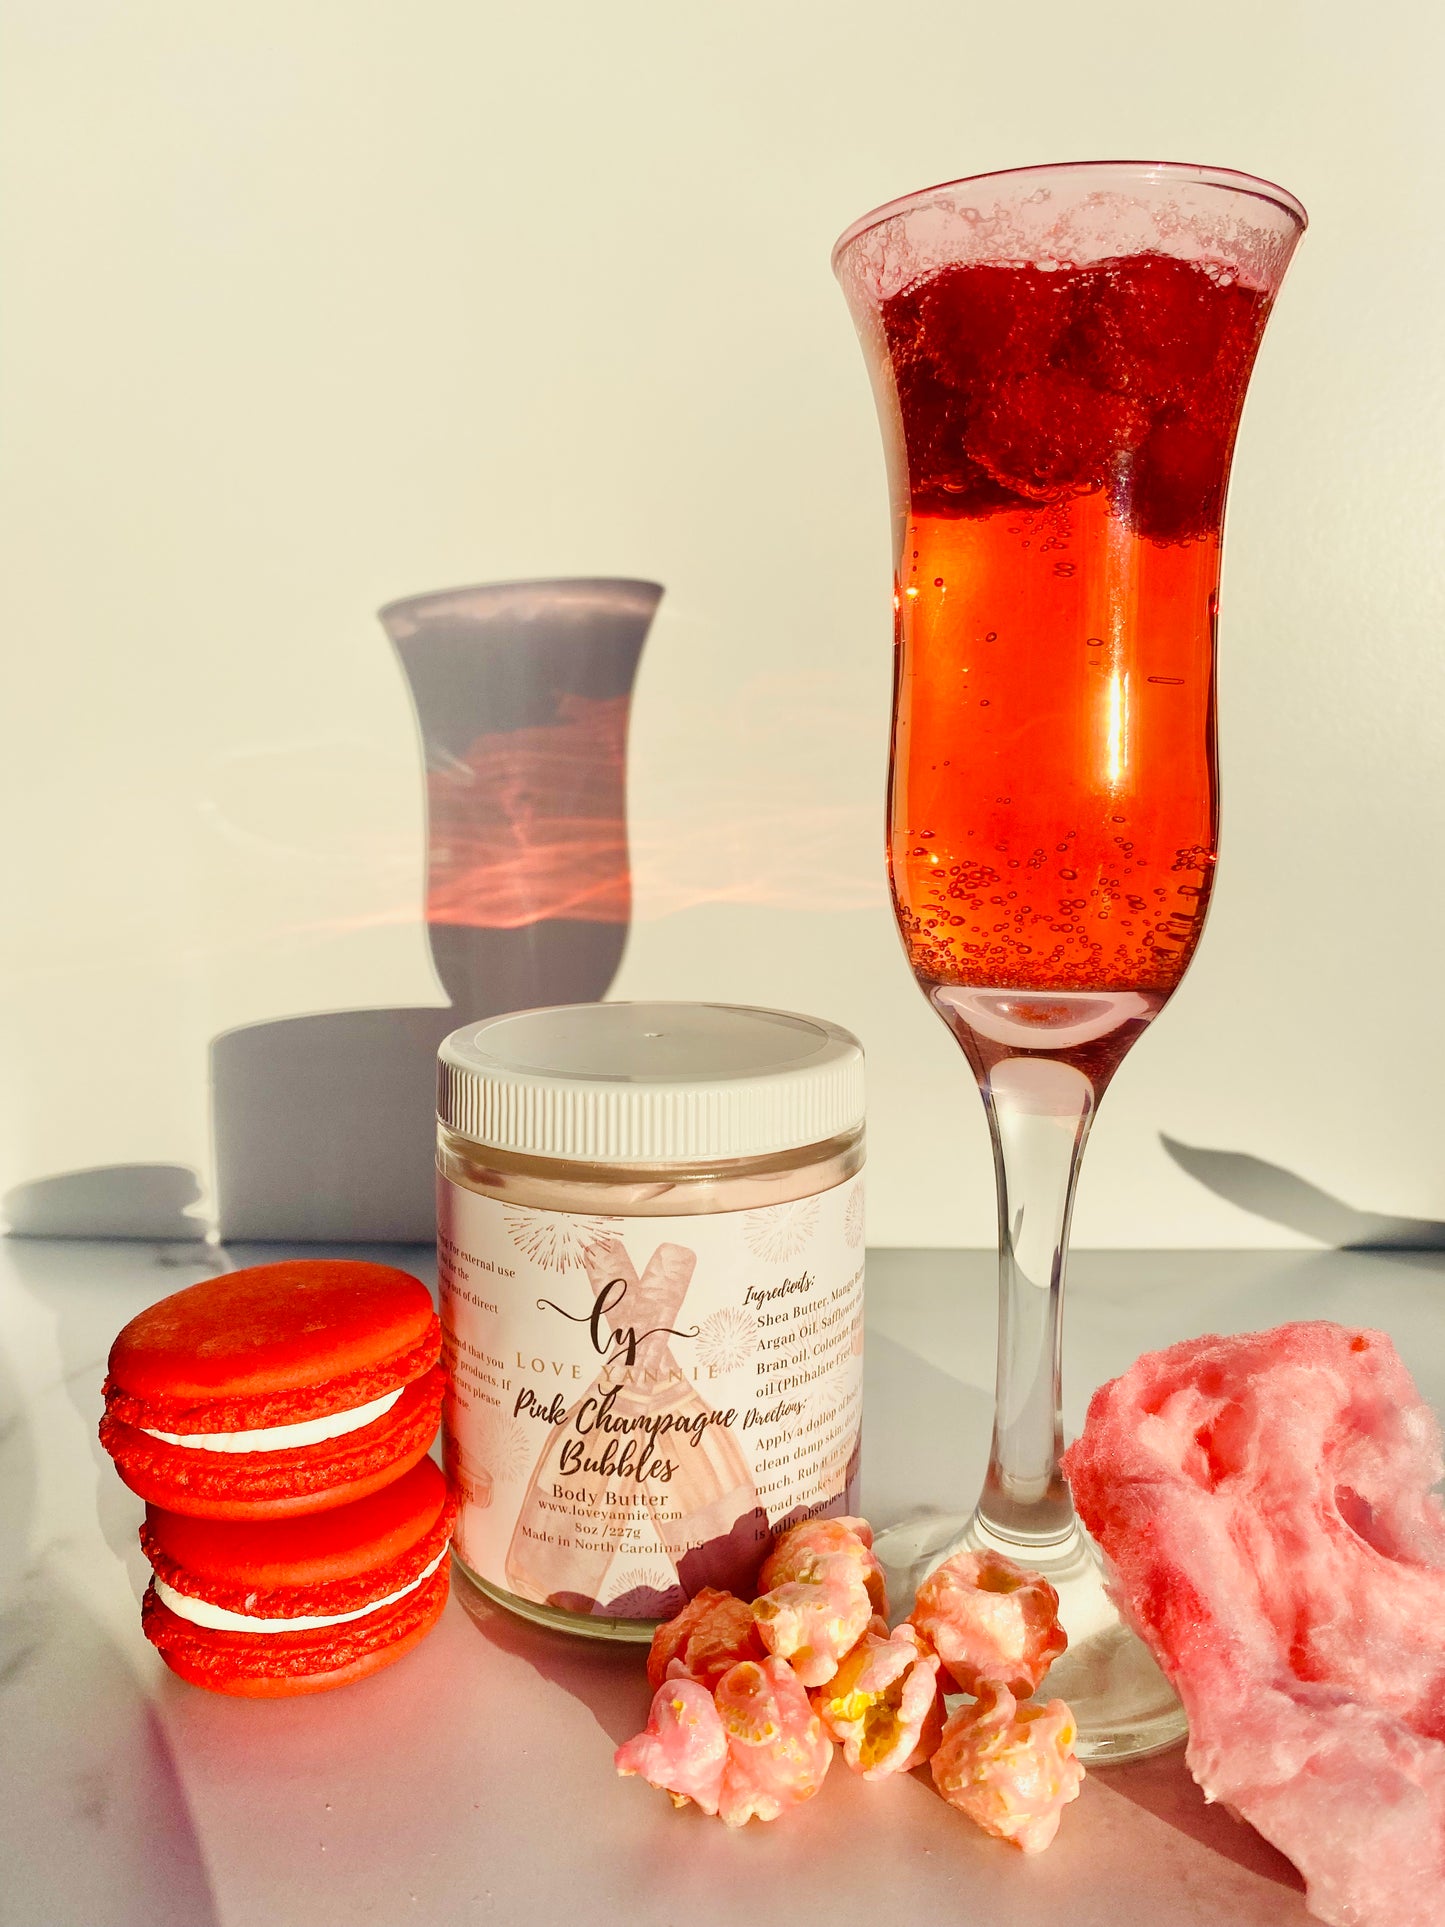 Pink Champagne Bubbles Body Butter